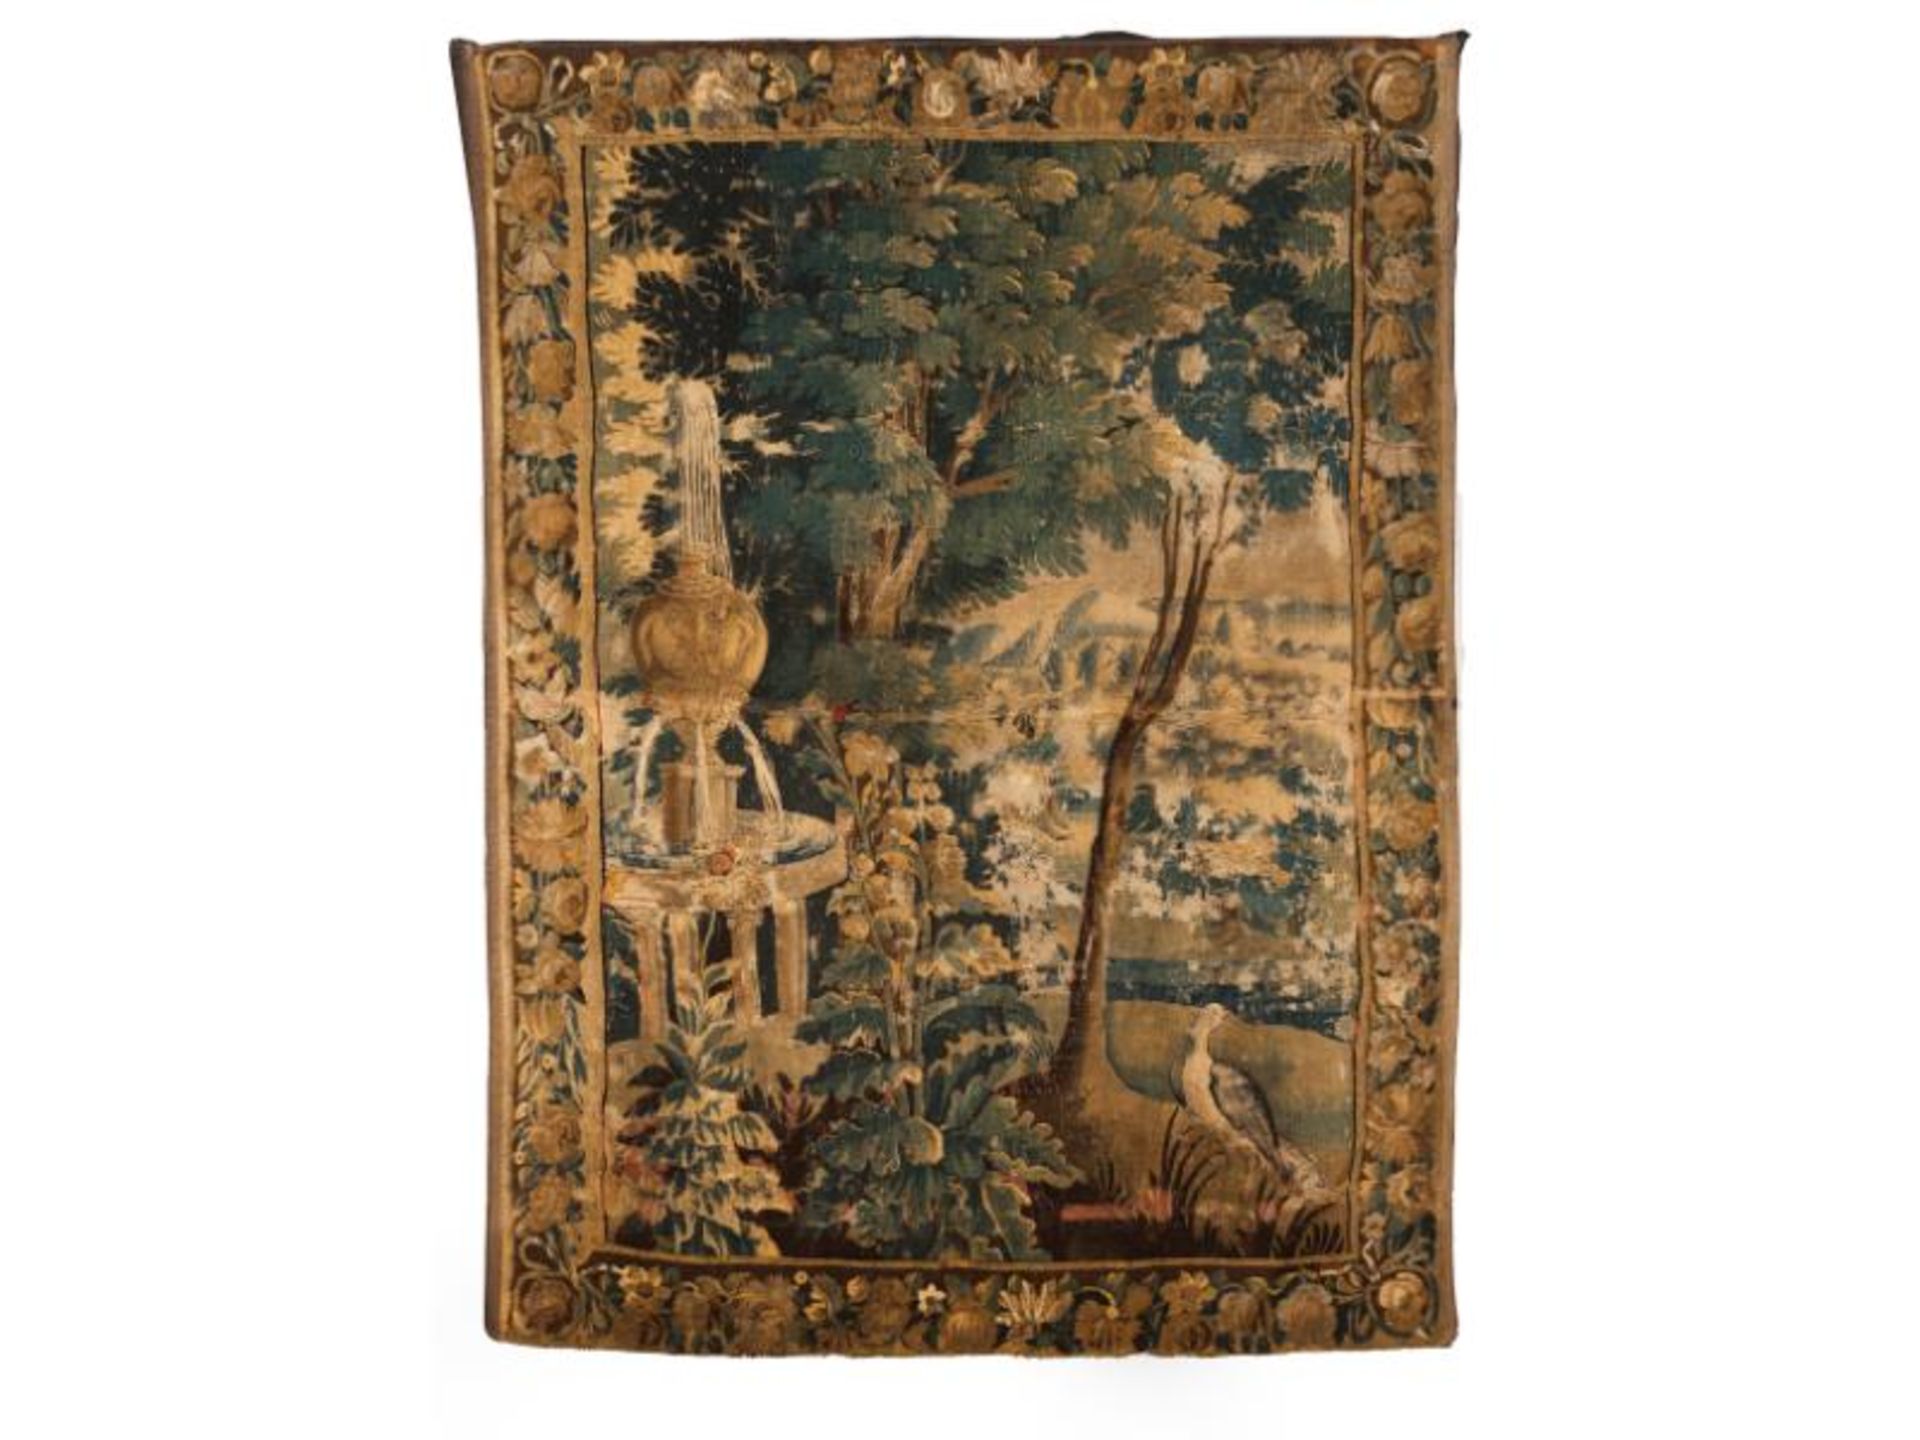 A Aubusson tapestry